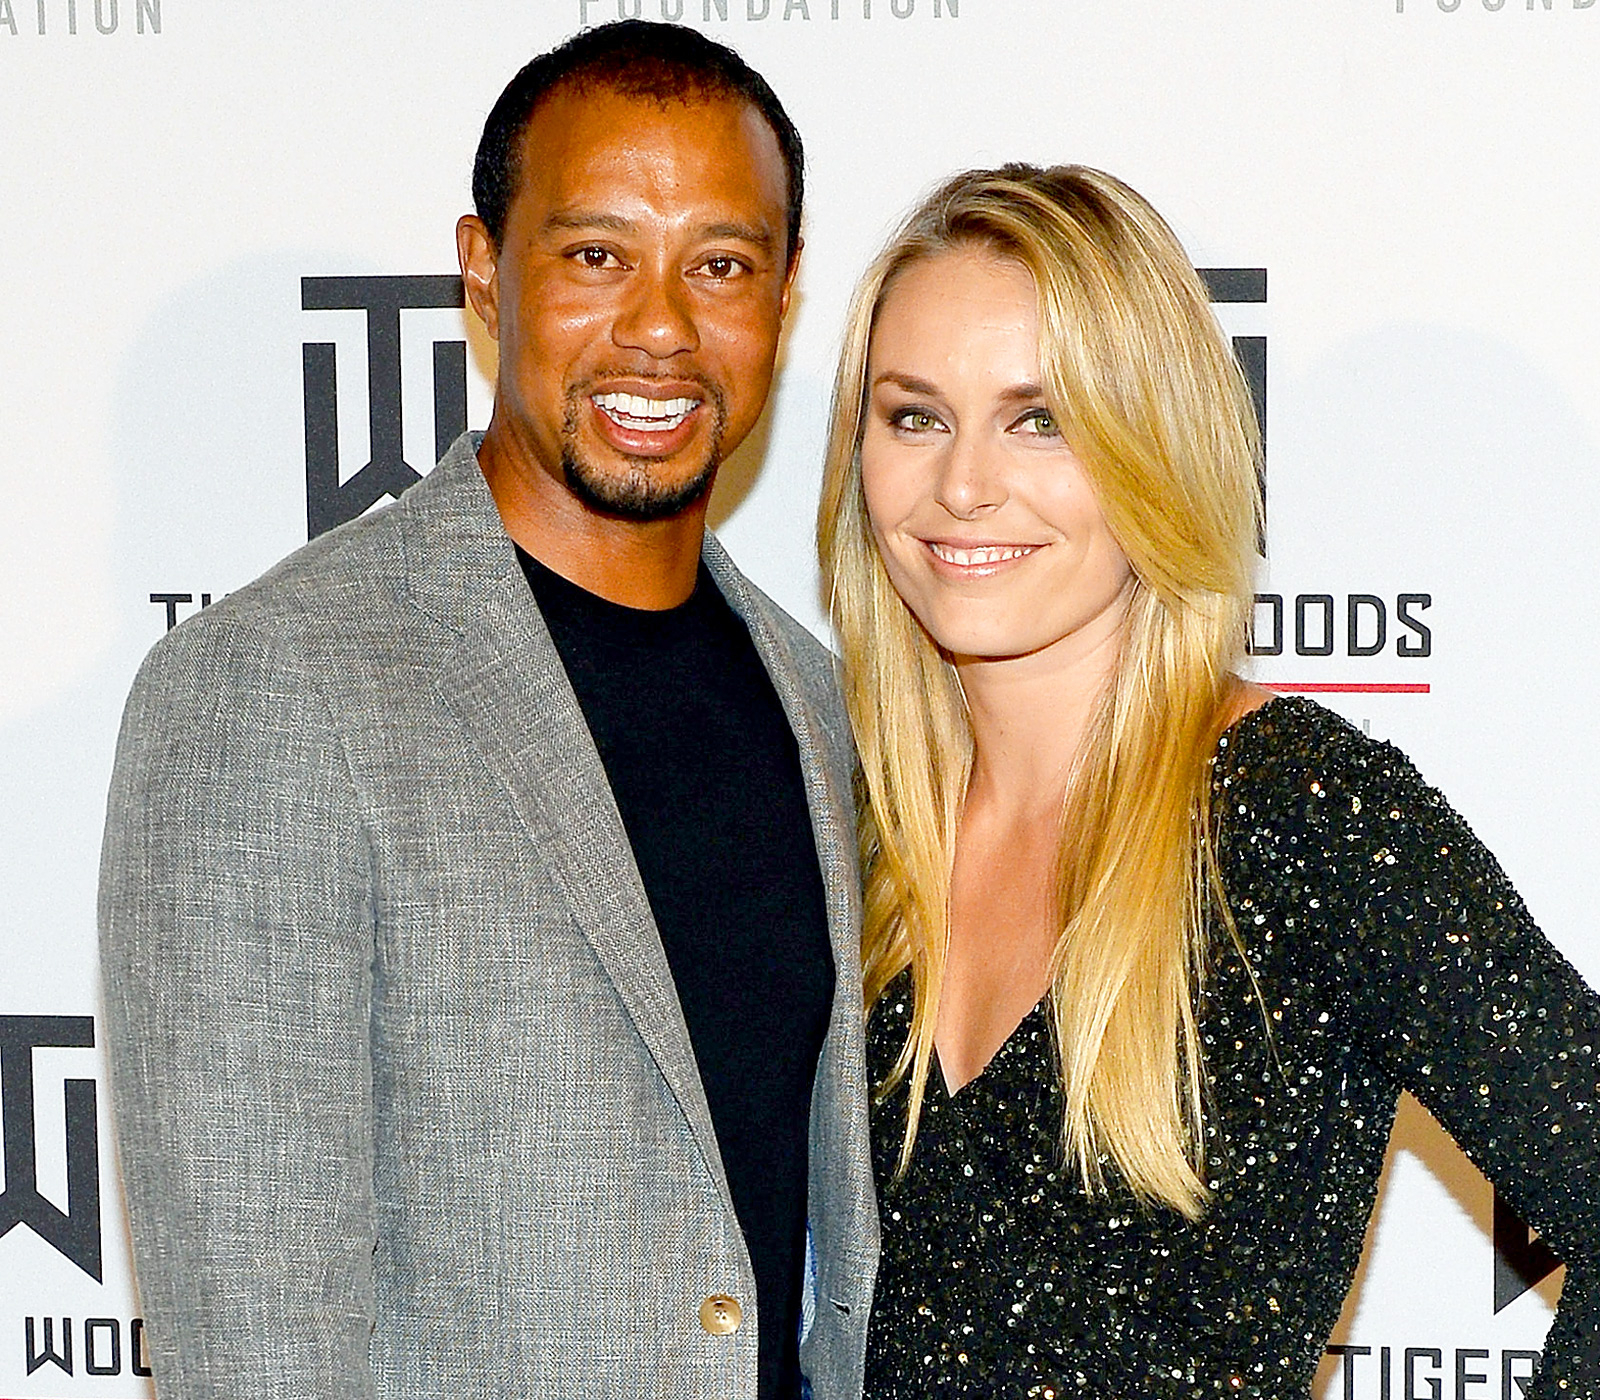 tiger woods naked wife photo